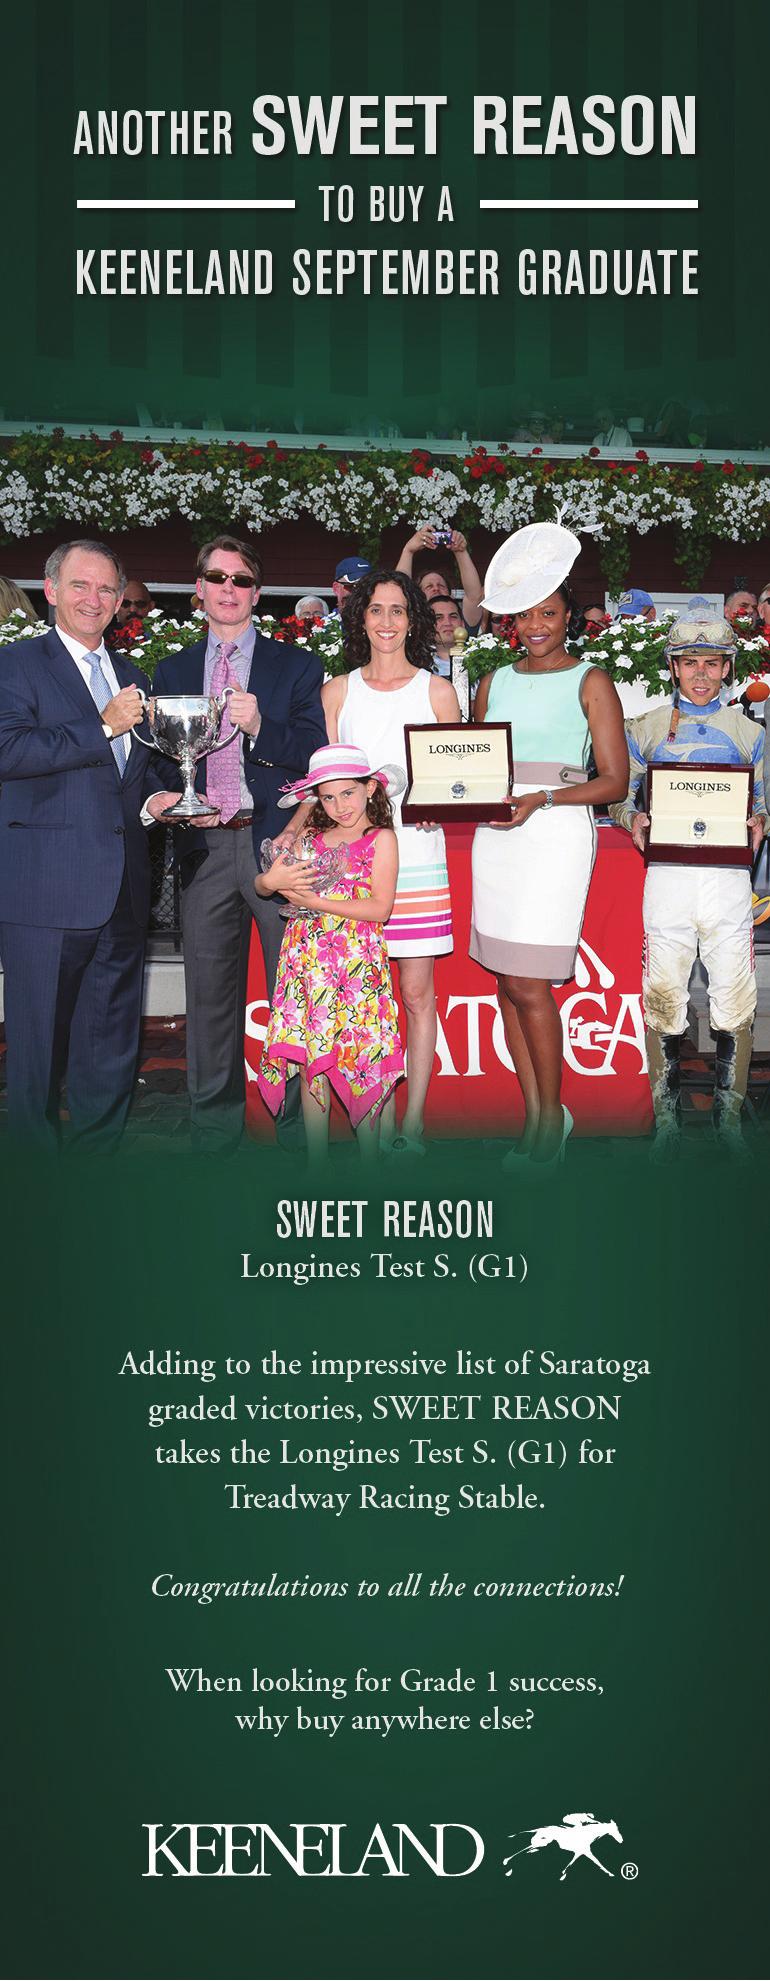 TDN P HEADLINE NEWS 8/5/14 PAGE 4 of 16 thoroughbreddailynews.com FASIG-TIPTON SARATOGA SELECTED MONDAY S TOP 10 YEARLINGS Hip Sex Sire 81 f Tapit Dam Price ($) She Be Wild 1,150,000 B-M. & N.